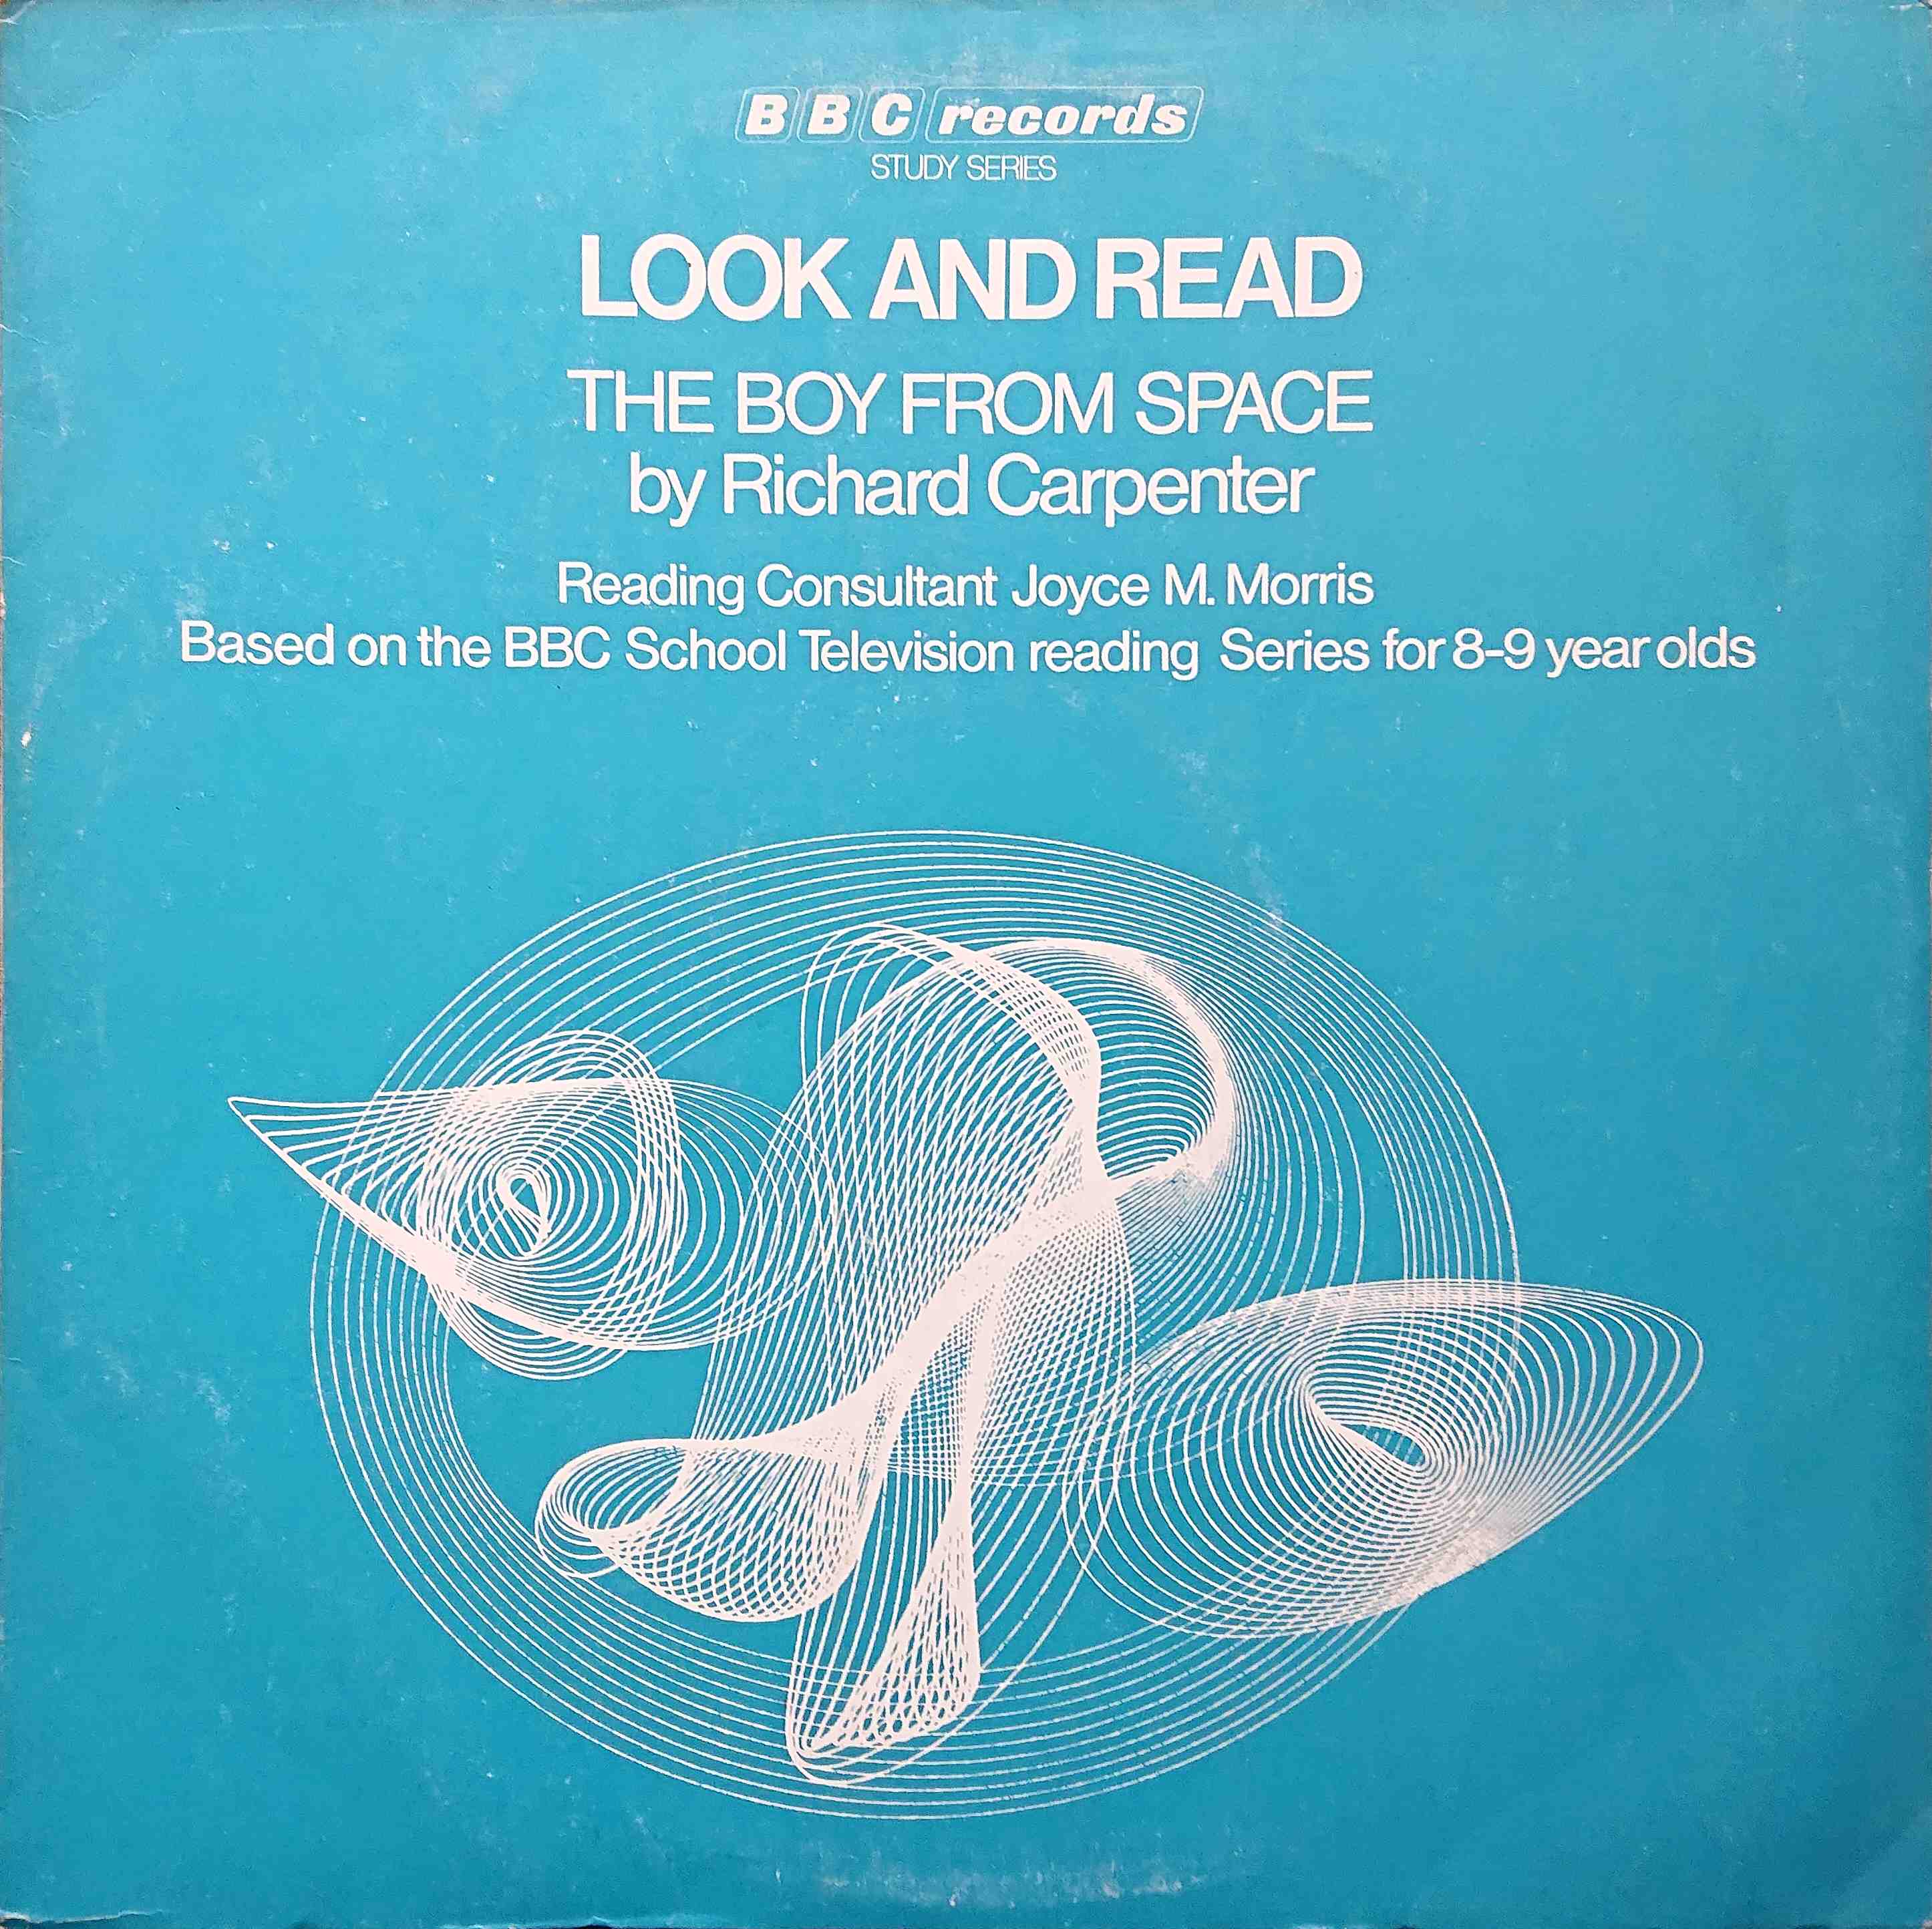 Picture of RESR 30 Look and read - The boy from space  by artist Richard Carpenter from the BBC albums - Records and Tapes library